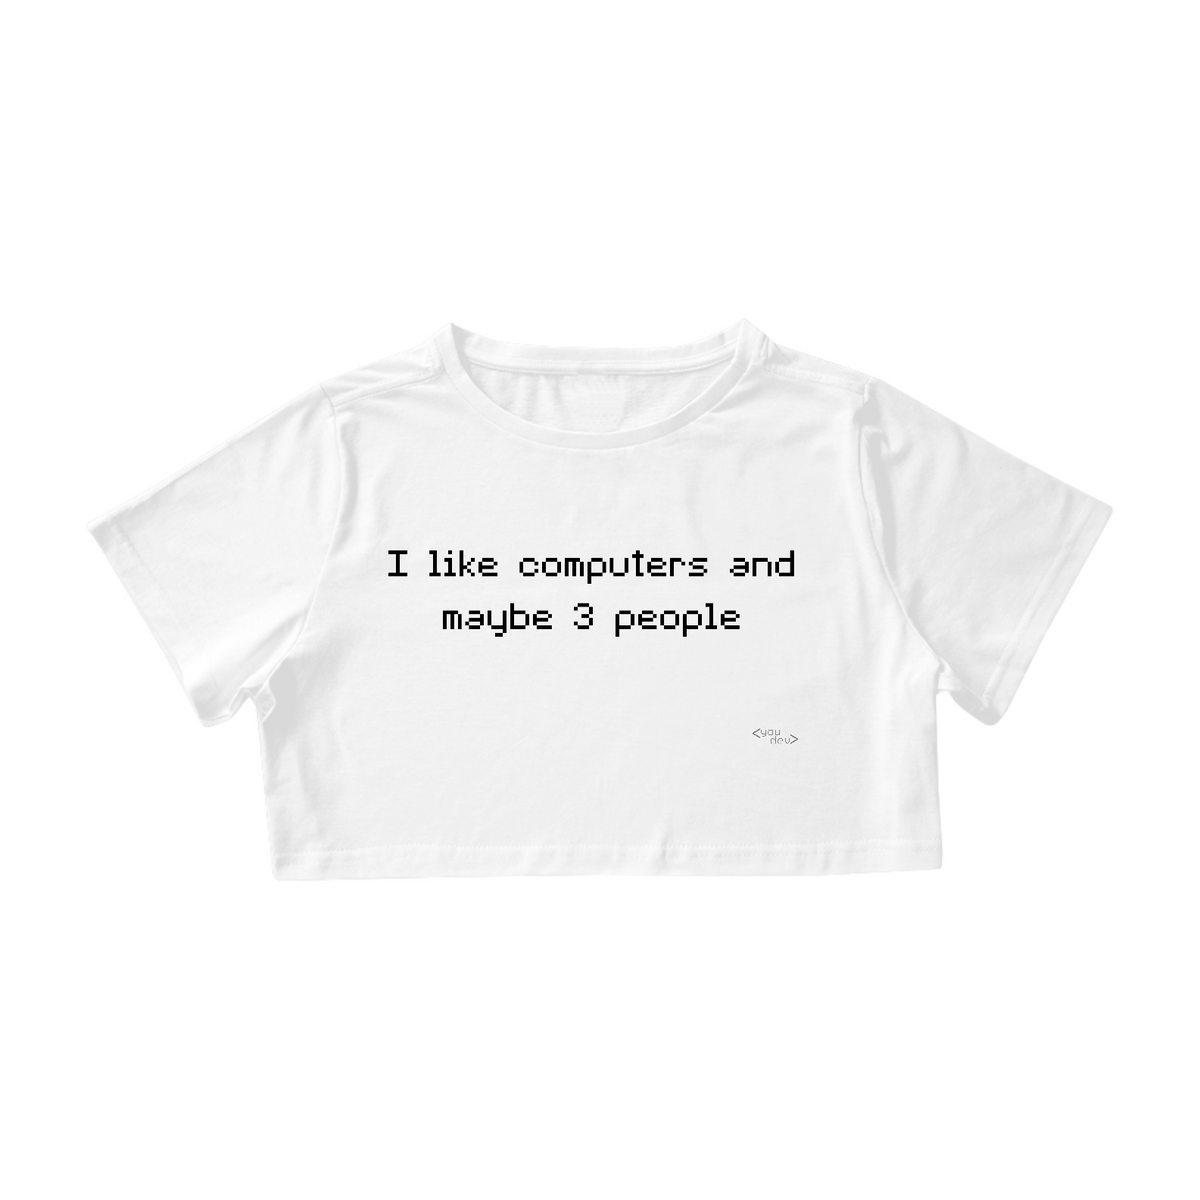 Nome do produto: I like computers and maybe 3 people - white